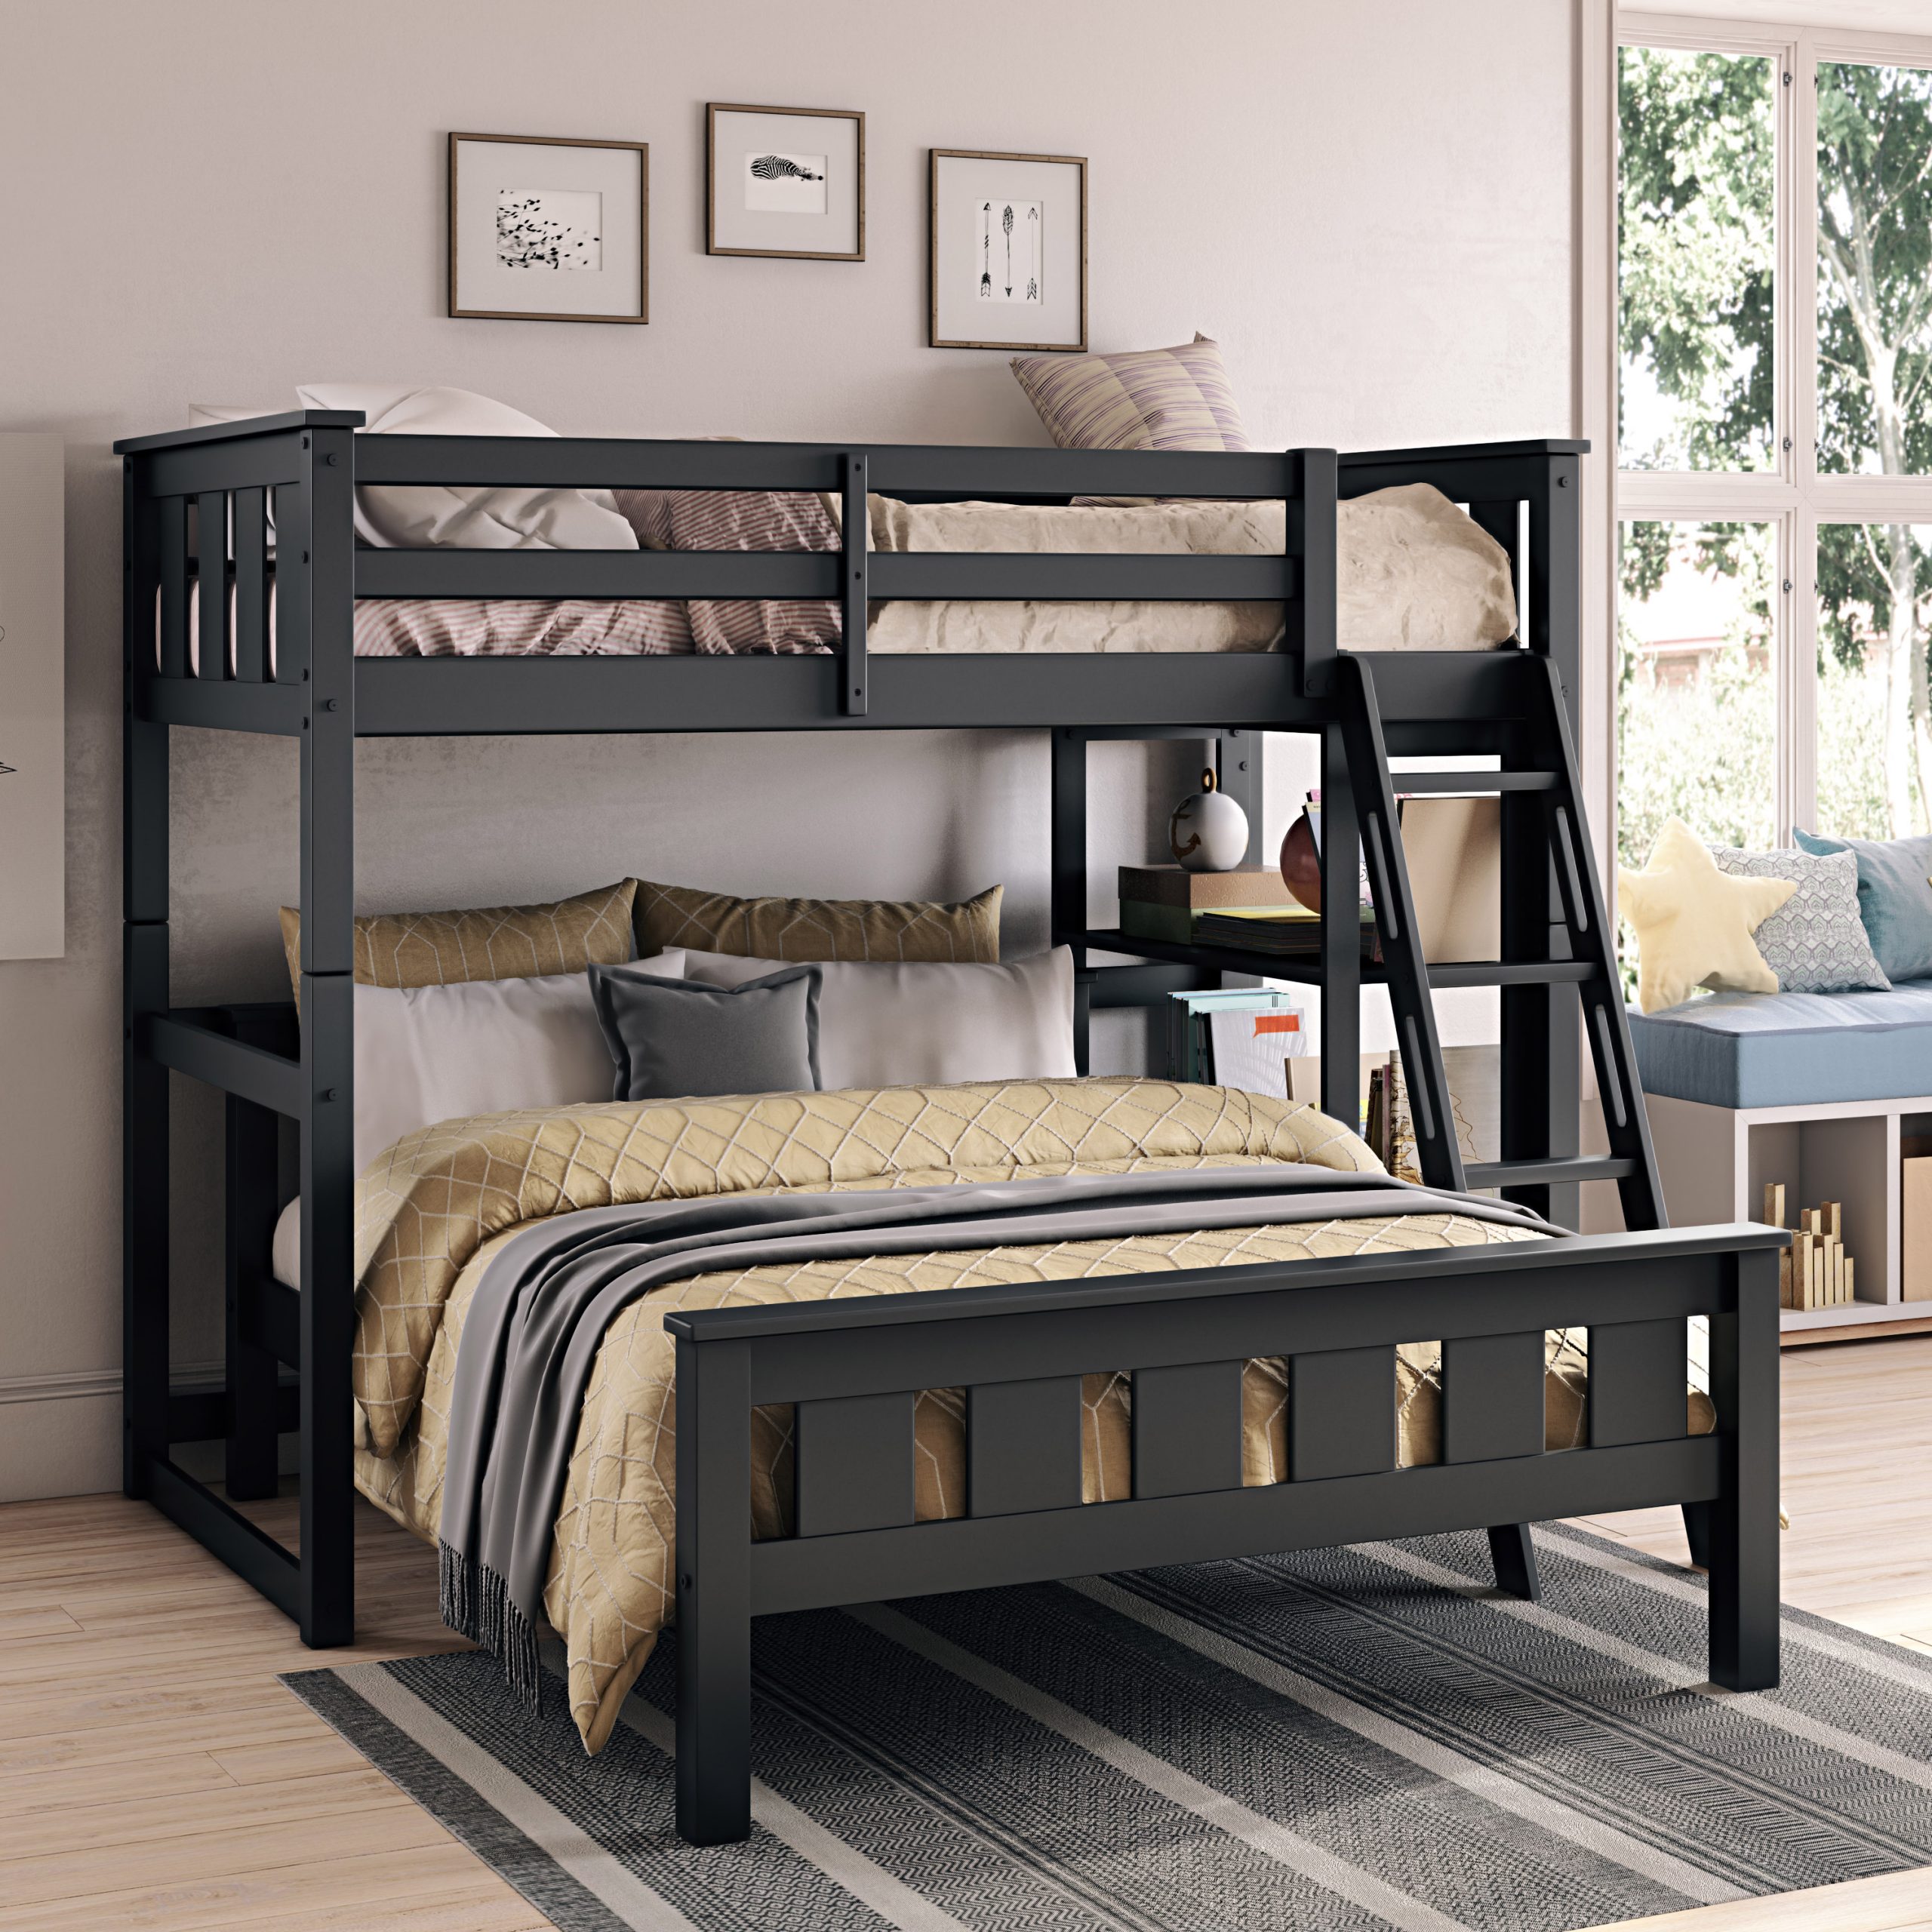 better homes twin bed